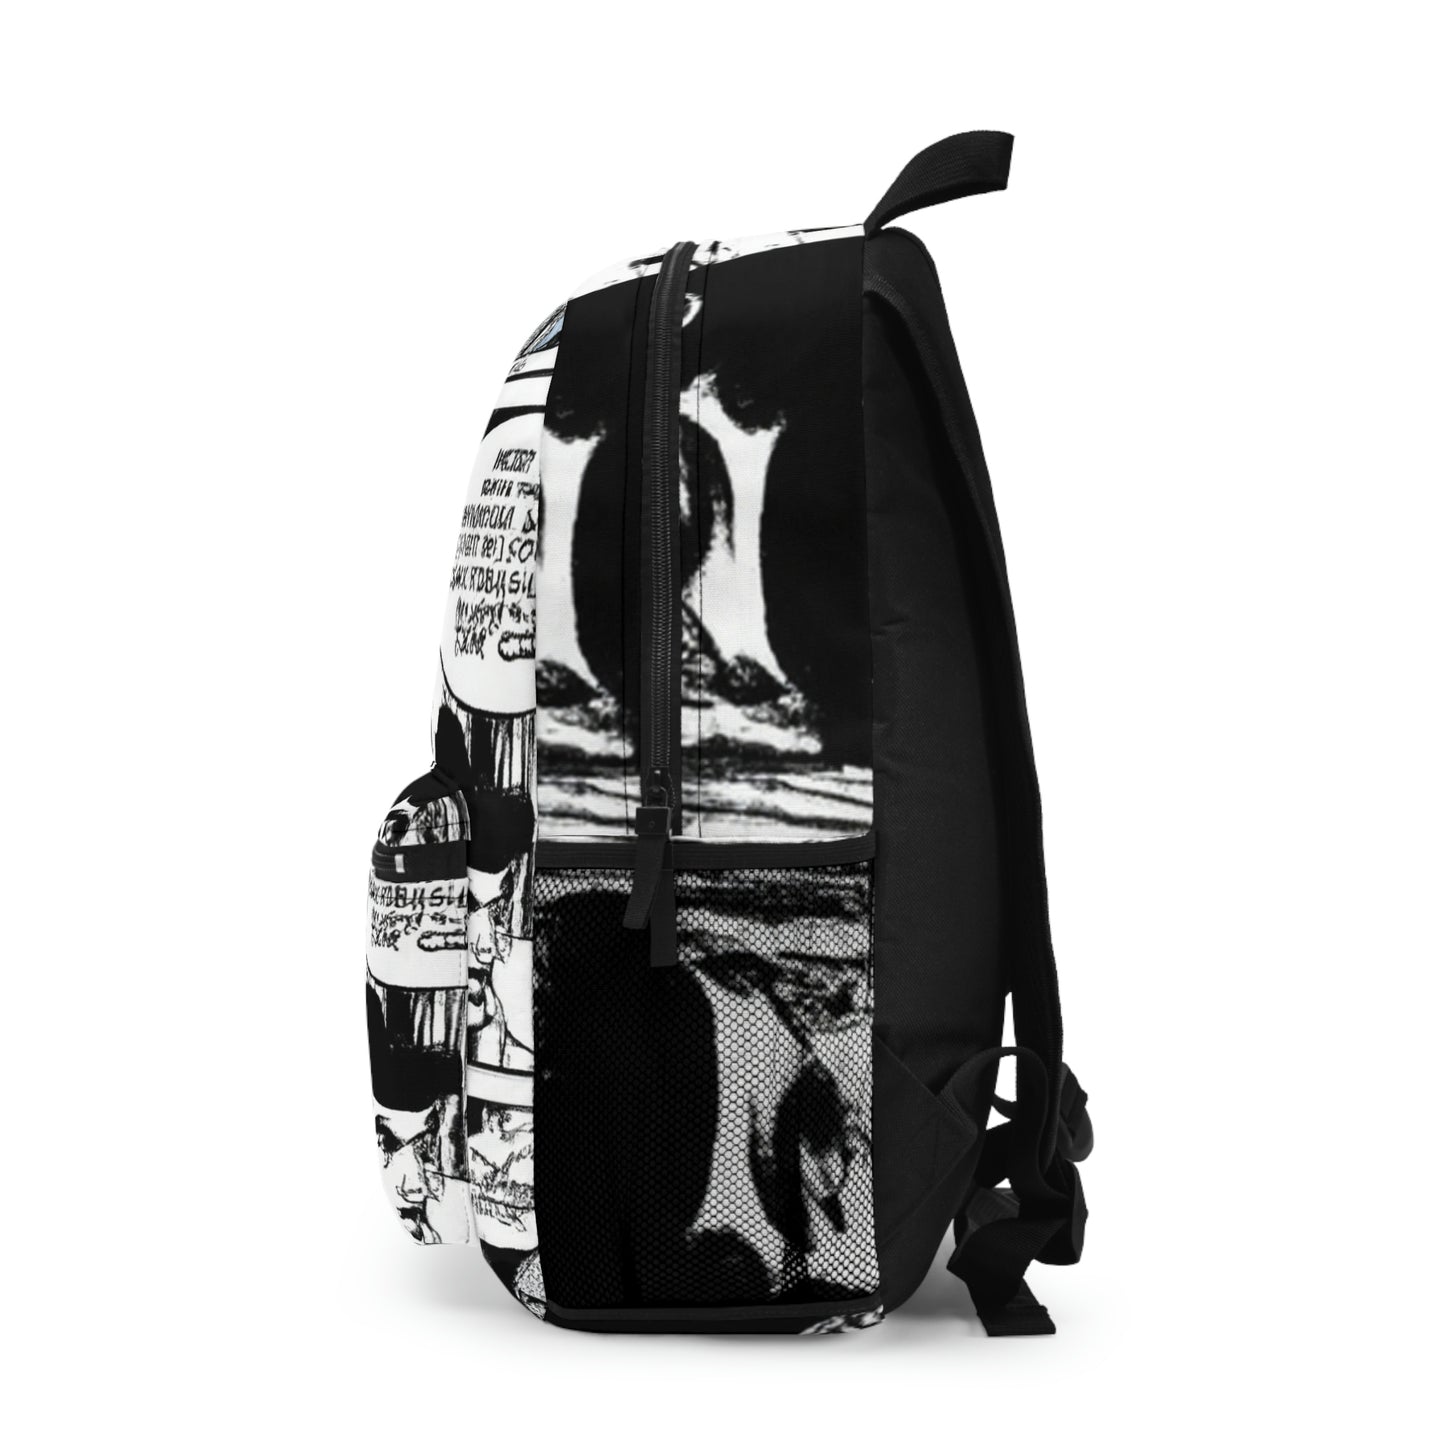 The Amazing Coolman! - Comic Book Backpack